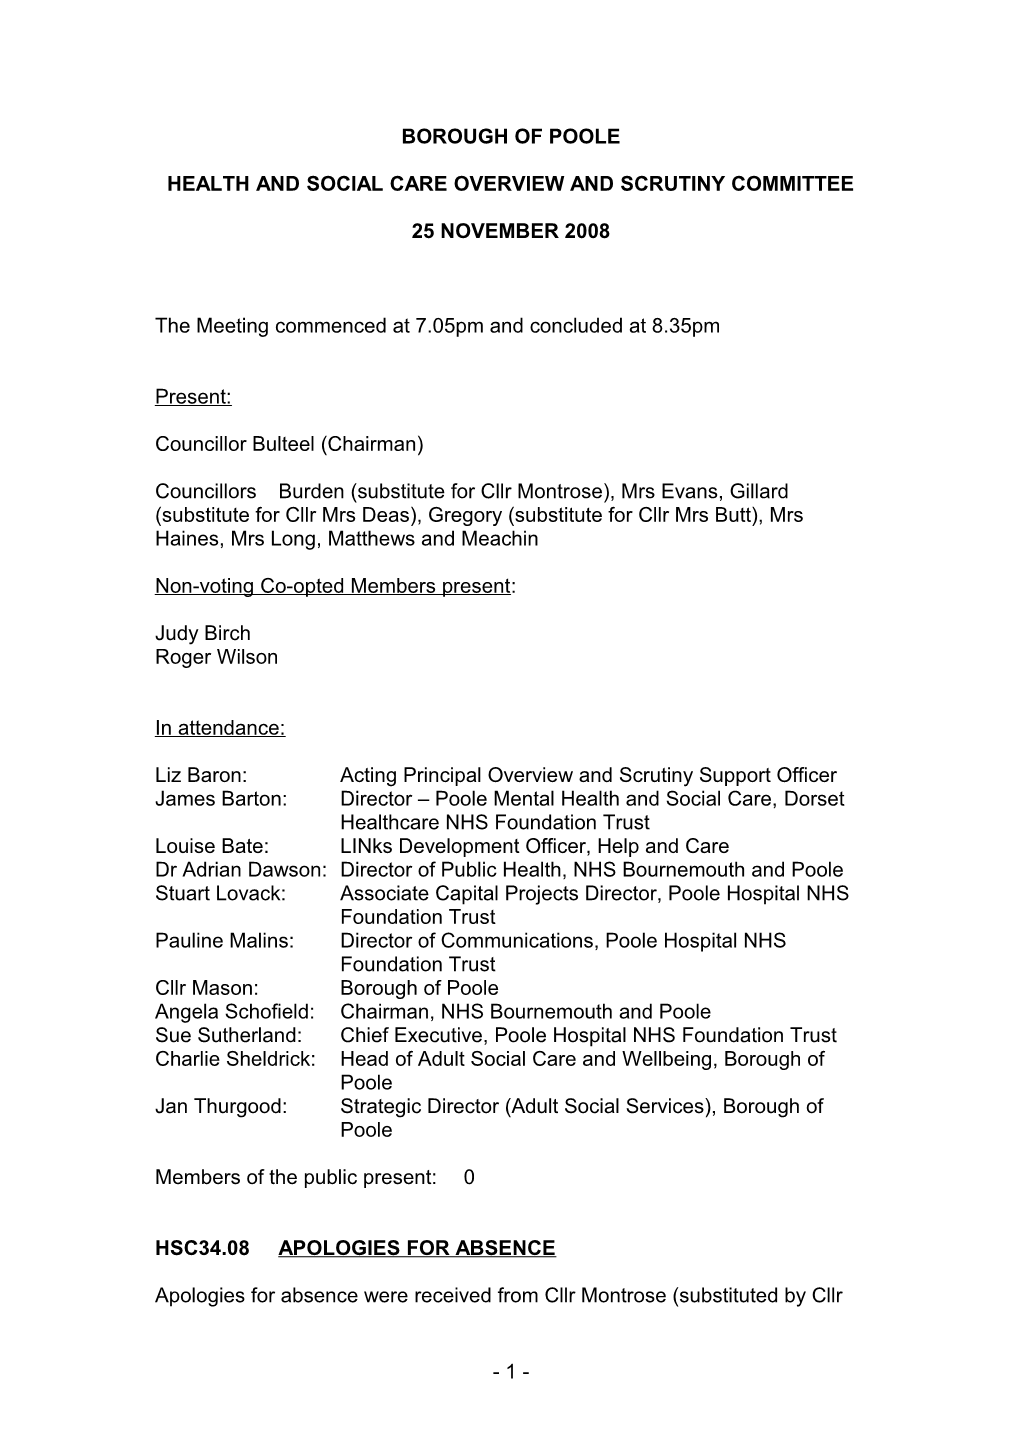 Minutes - Health and Social Care Overview and Scrutiny Committee - 25 November 2008